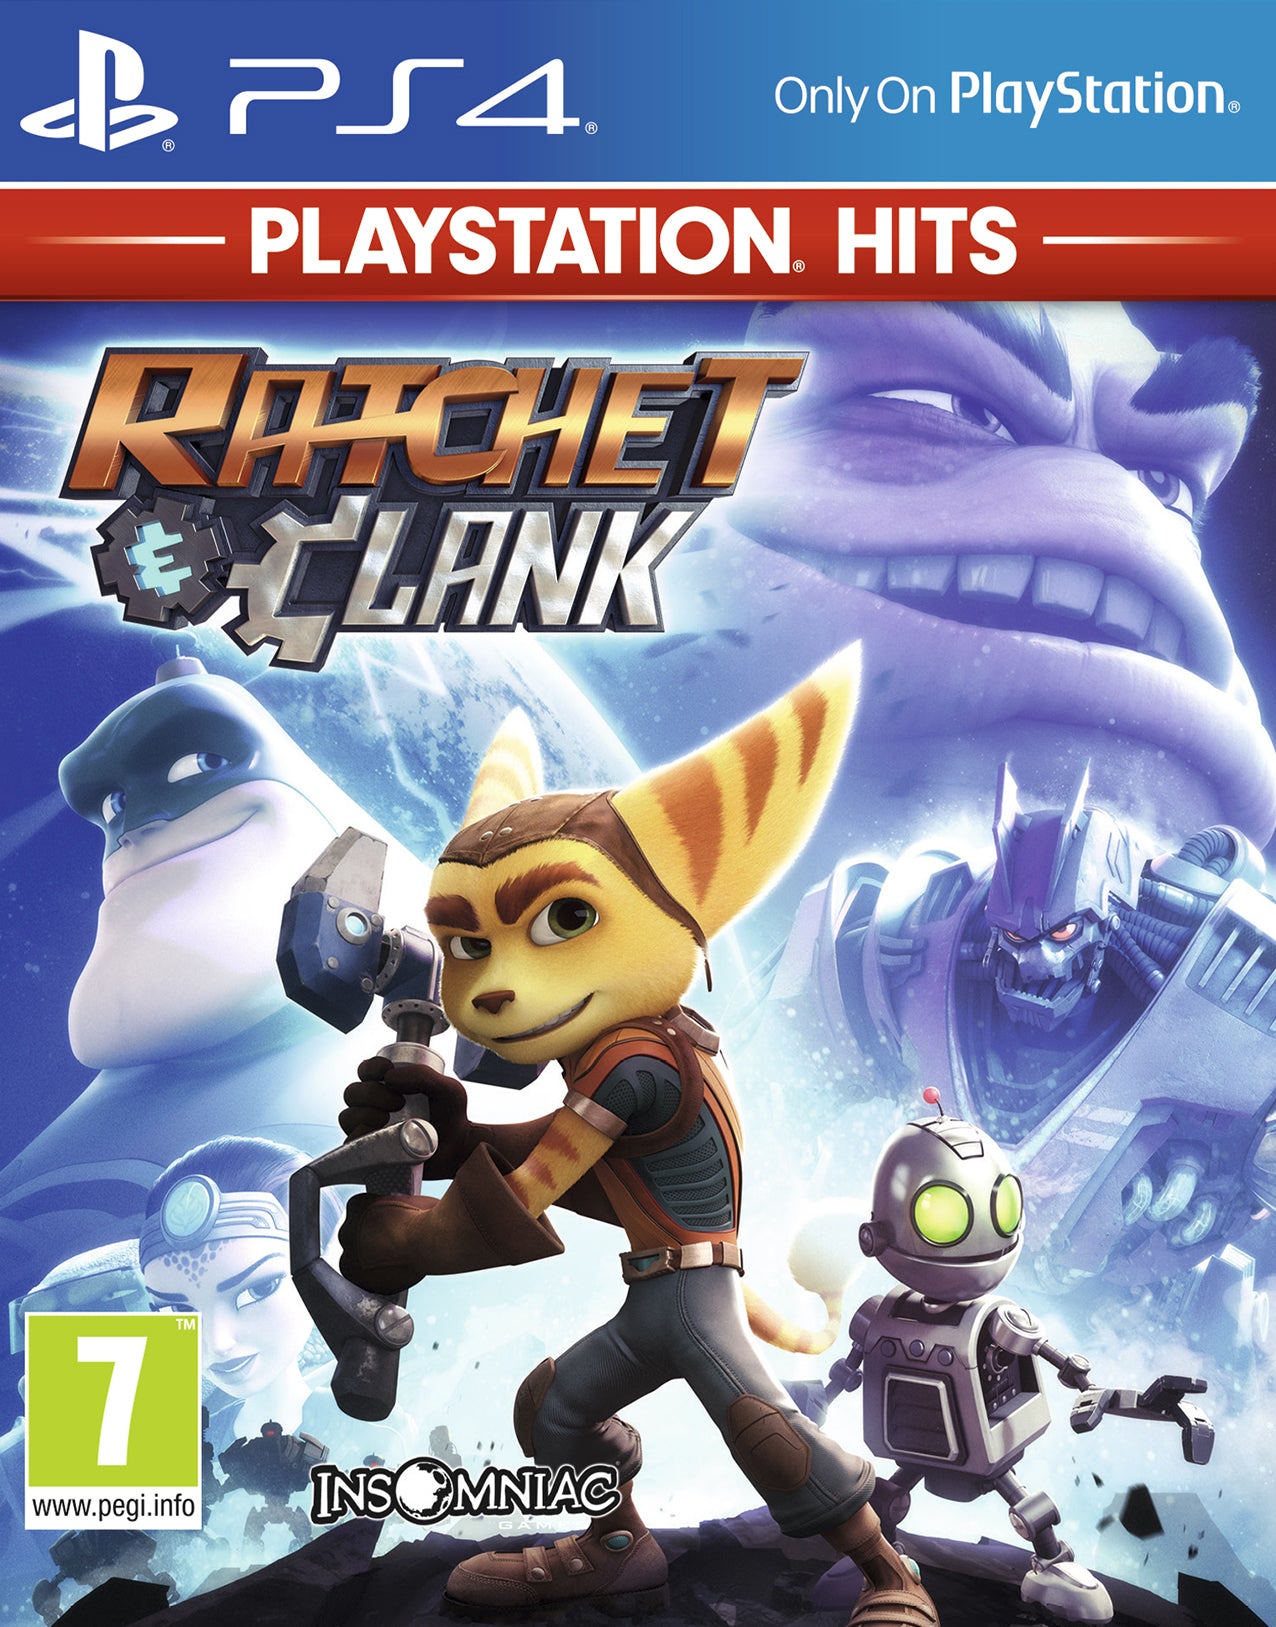 PlayStation Hits - Ratchet and Clank (PS4)